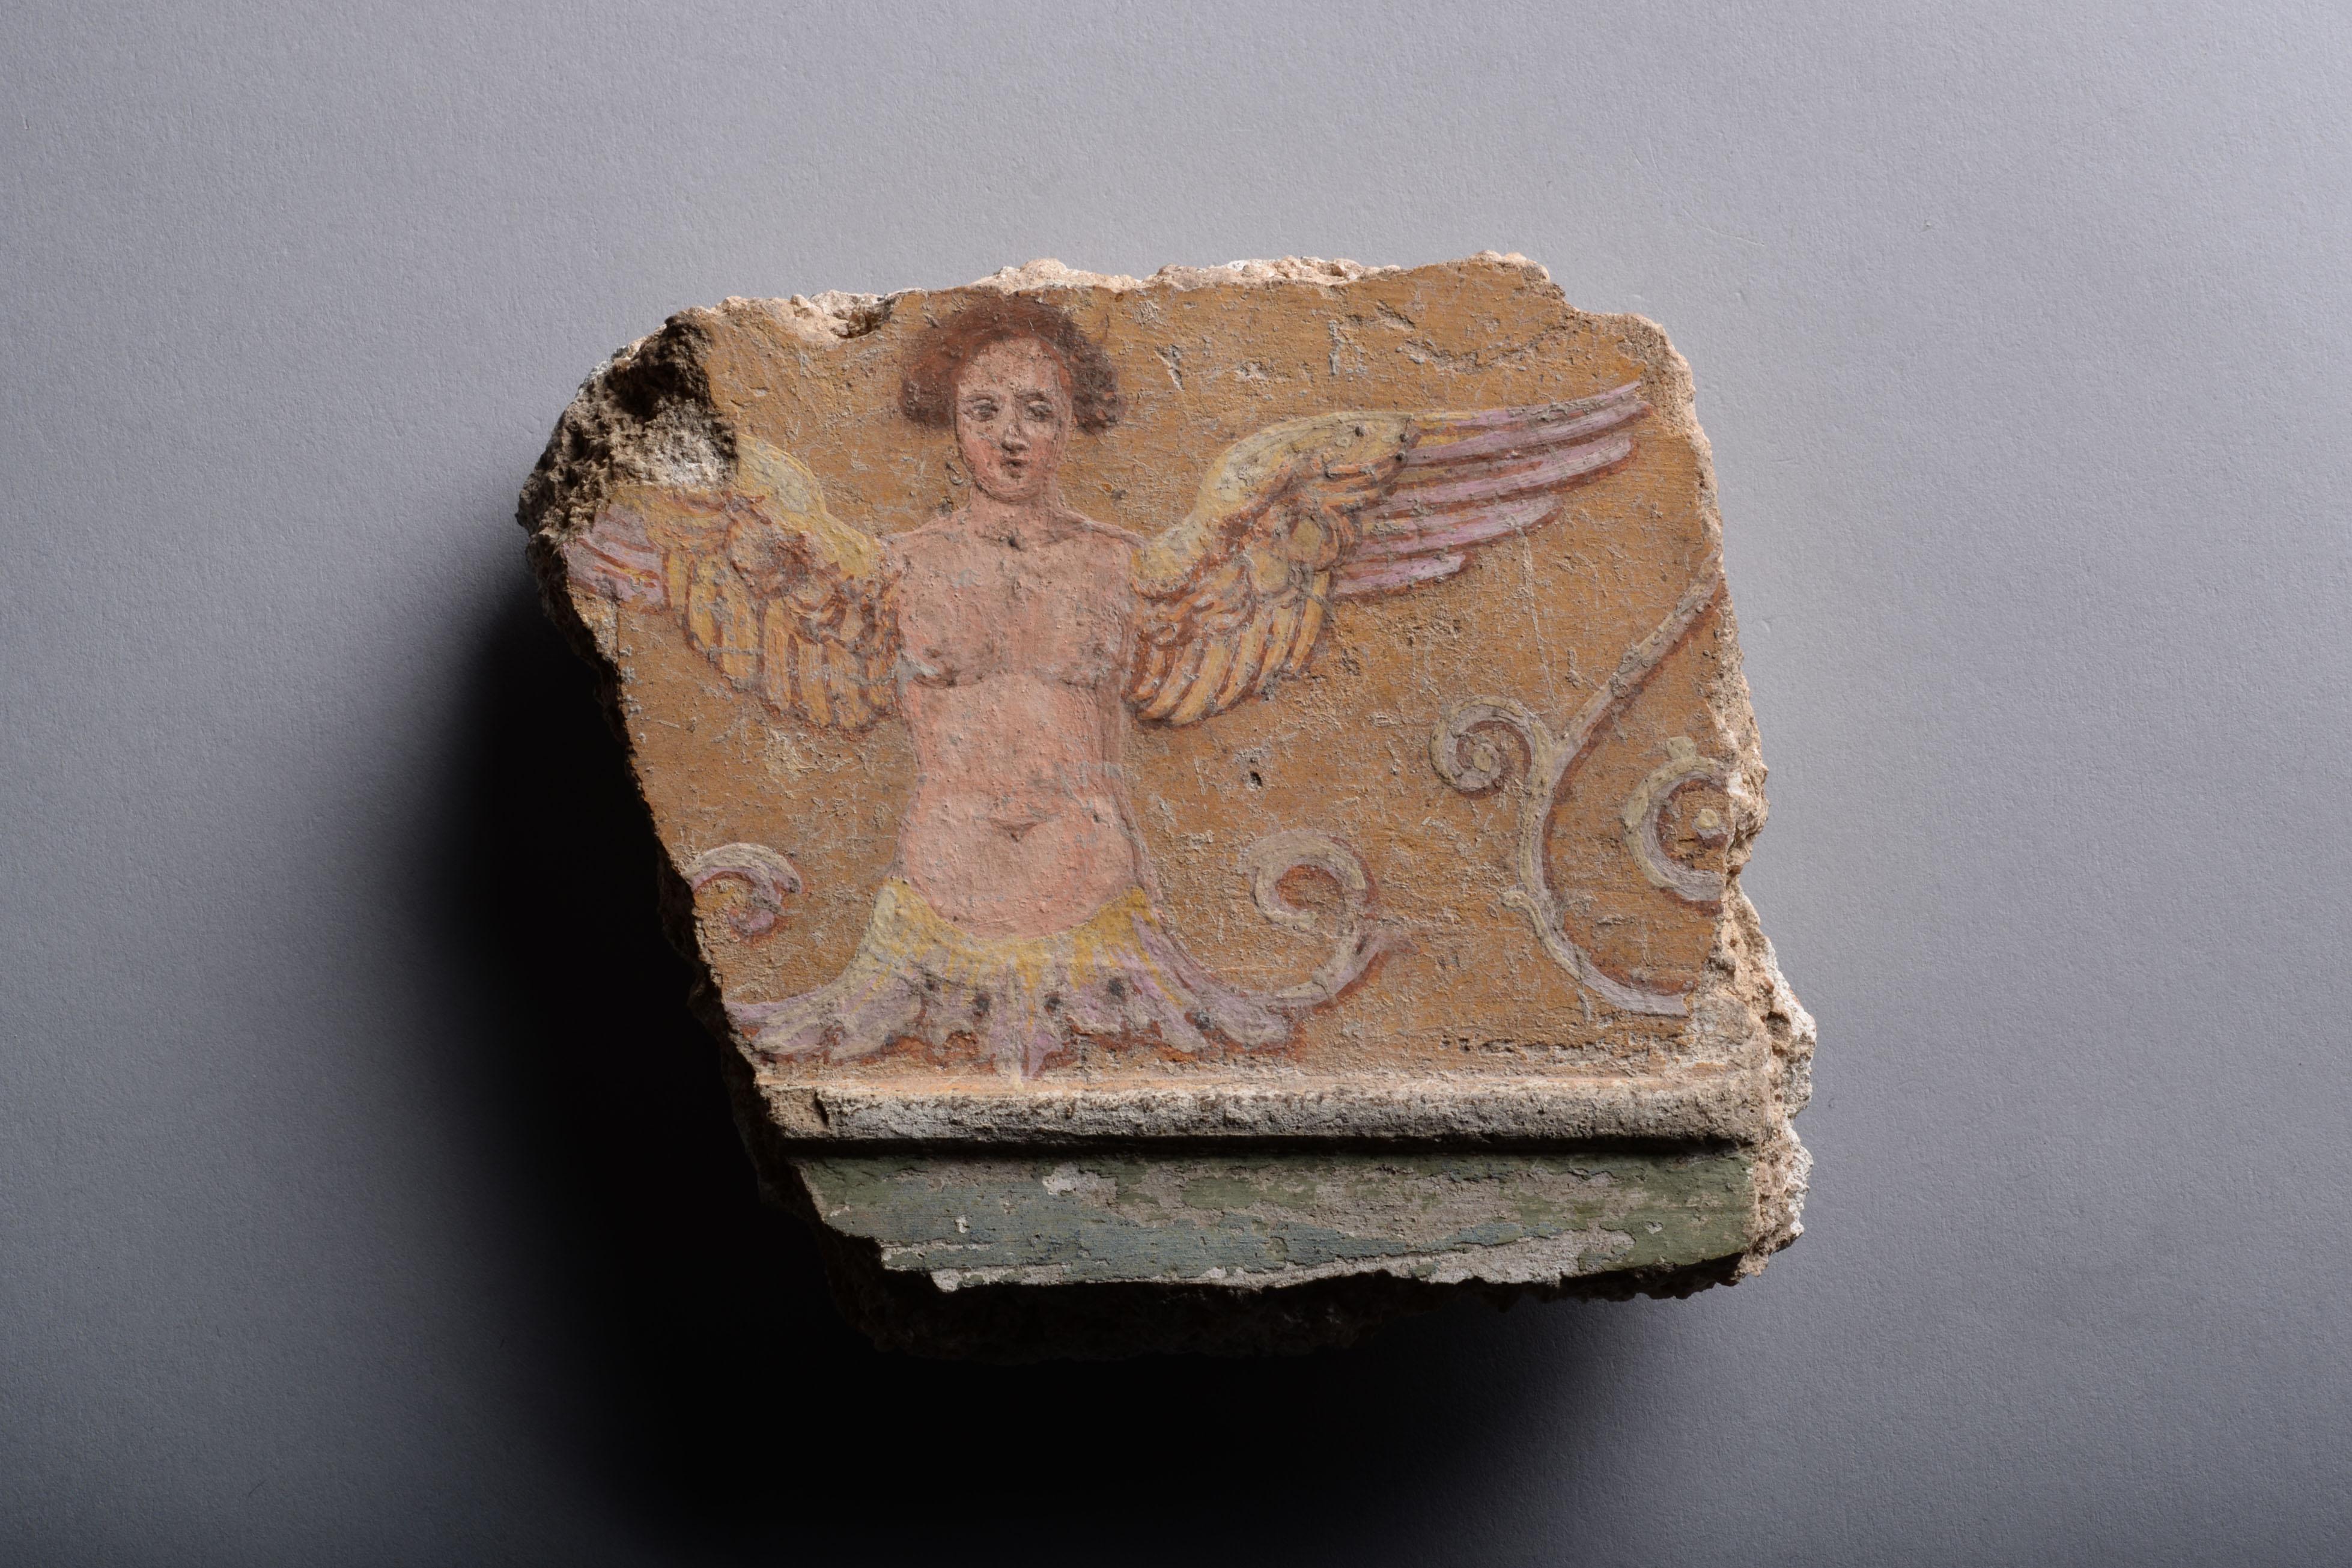 Roman Fresco Fragment Depicting a Siren
Circa 1st Century A.D.

‘‘Ludius … was the first to introduce the fashion of covering the walls of our houses with most pleasing landscapes, representing villas, porticos, ornamental gardening, woods,